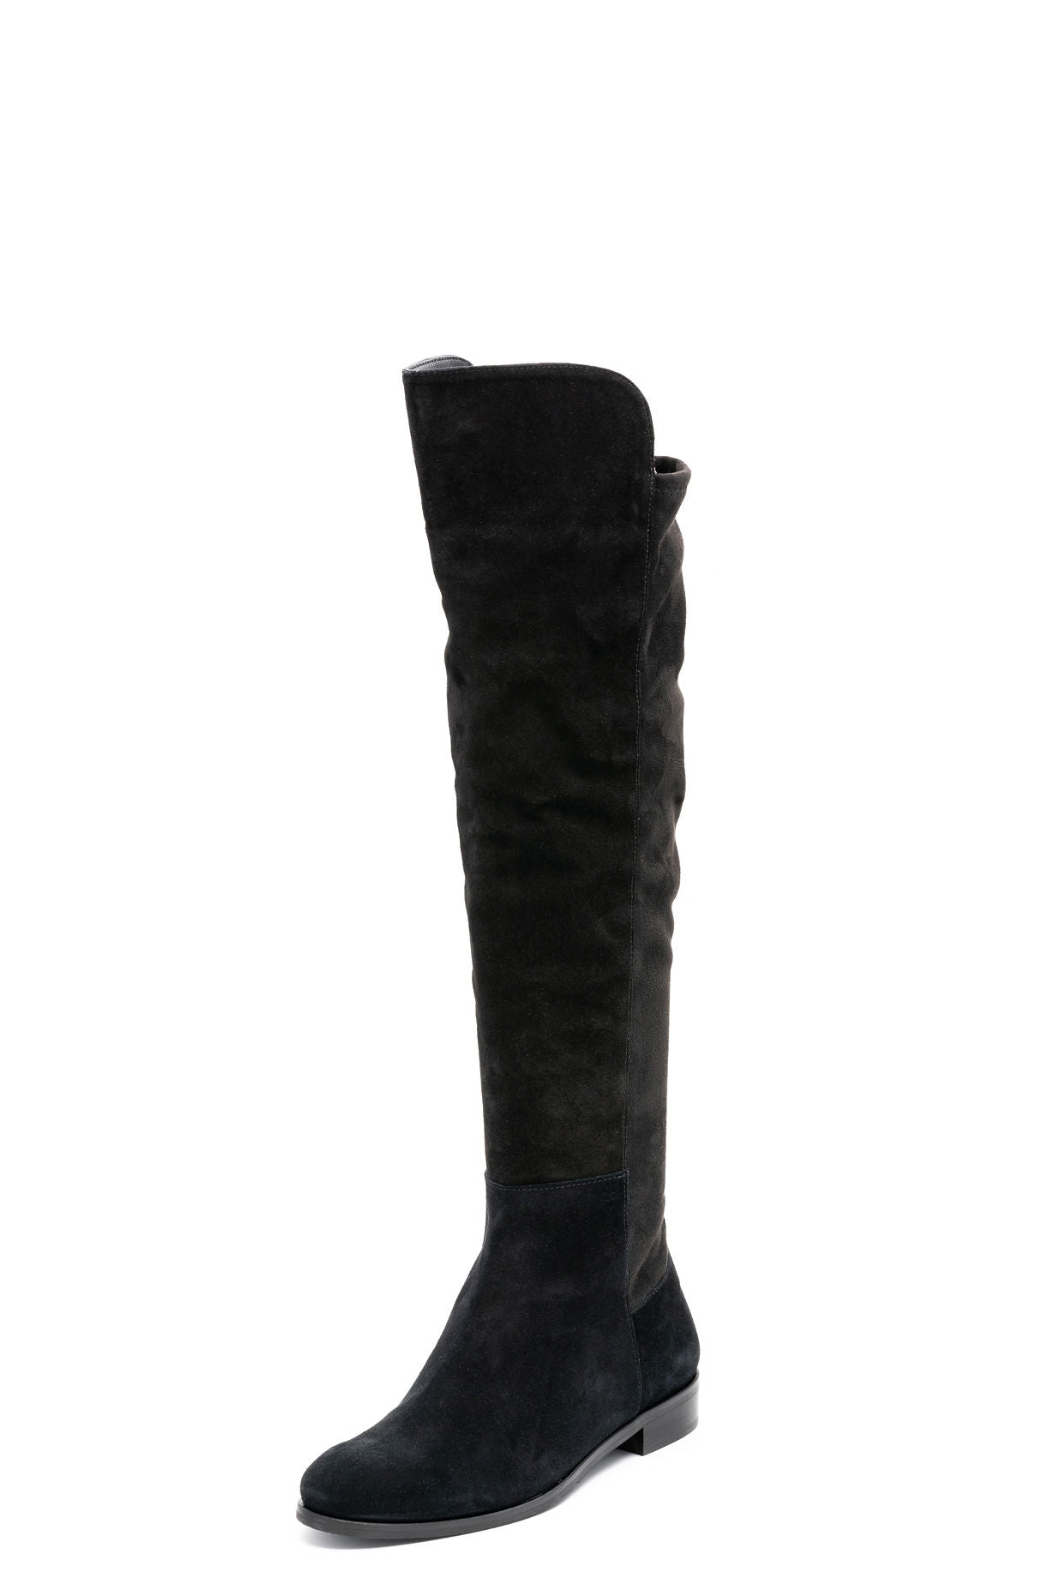 SERAFINA Pascucci Suede Over the Knee Boot